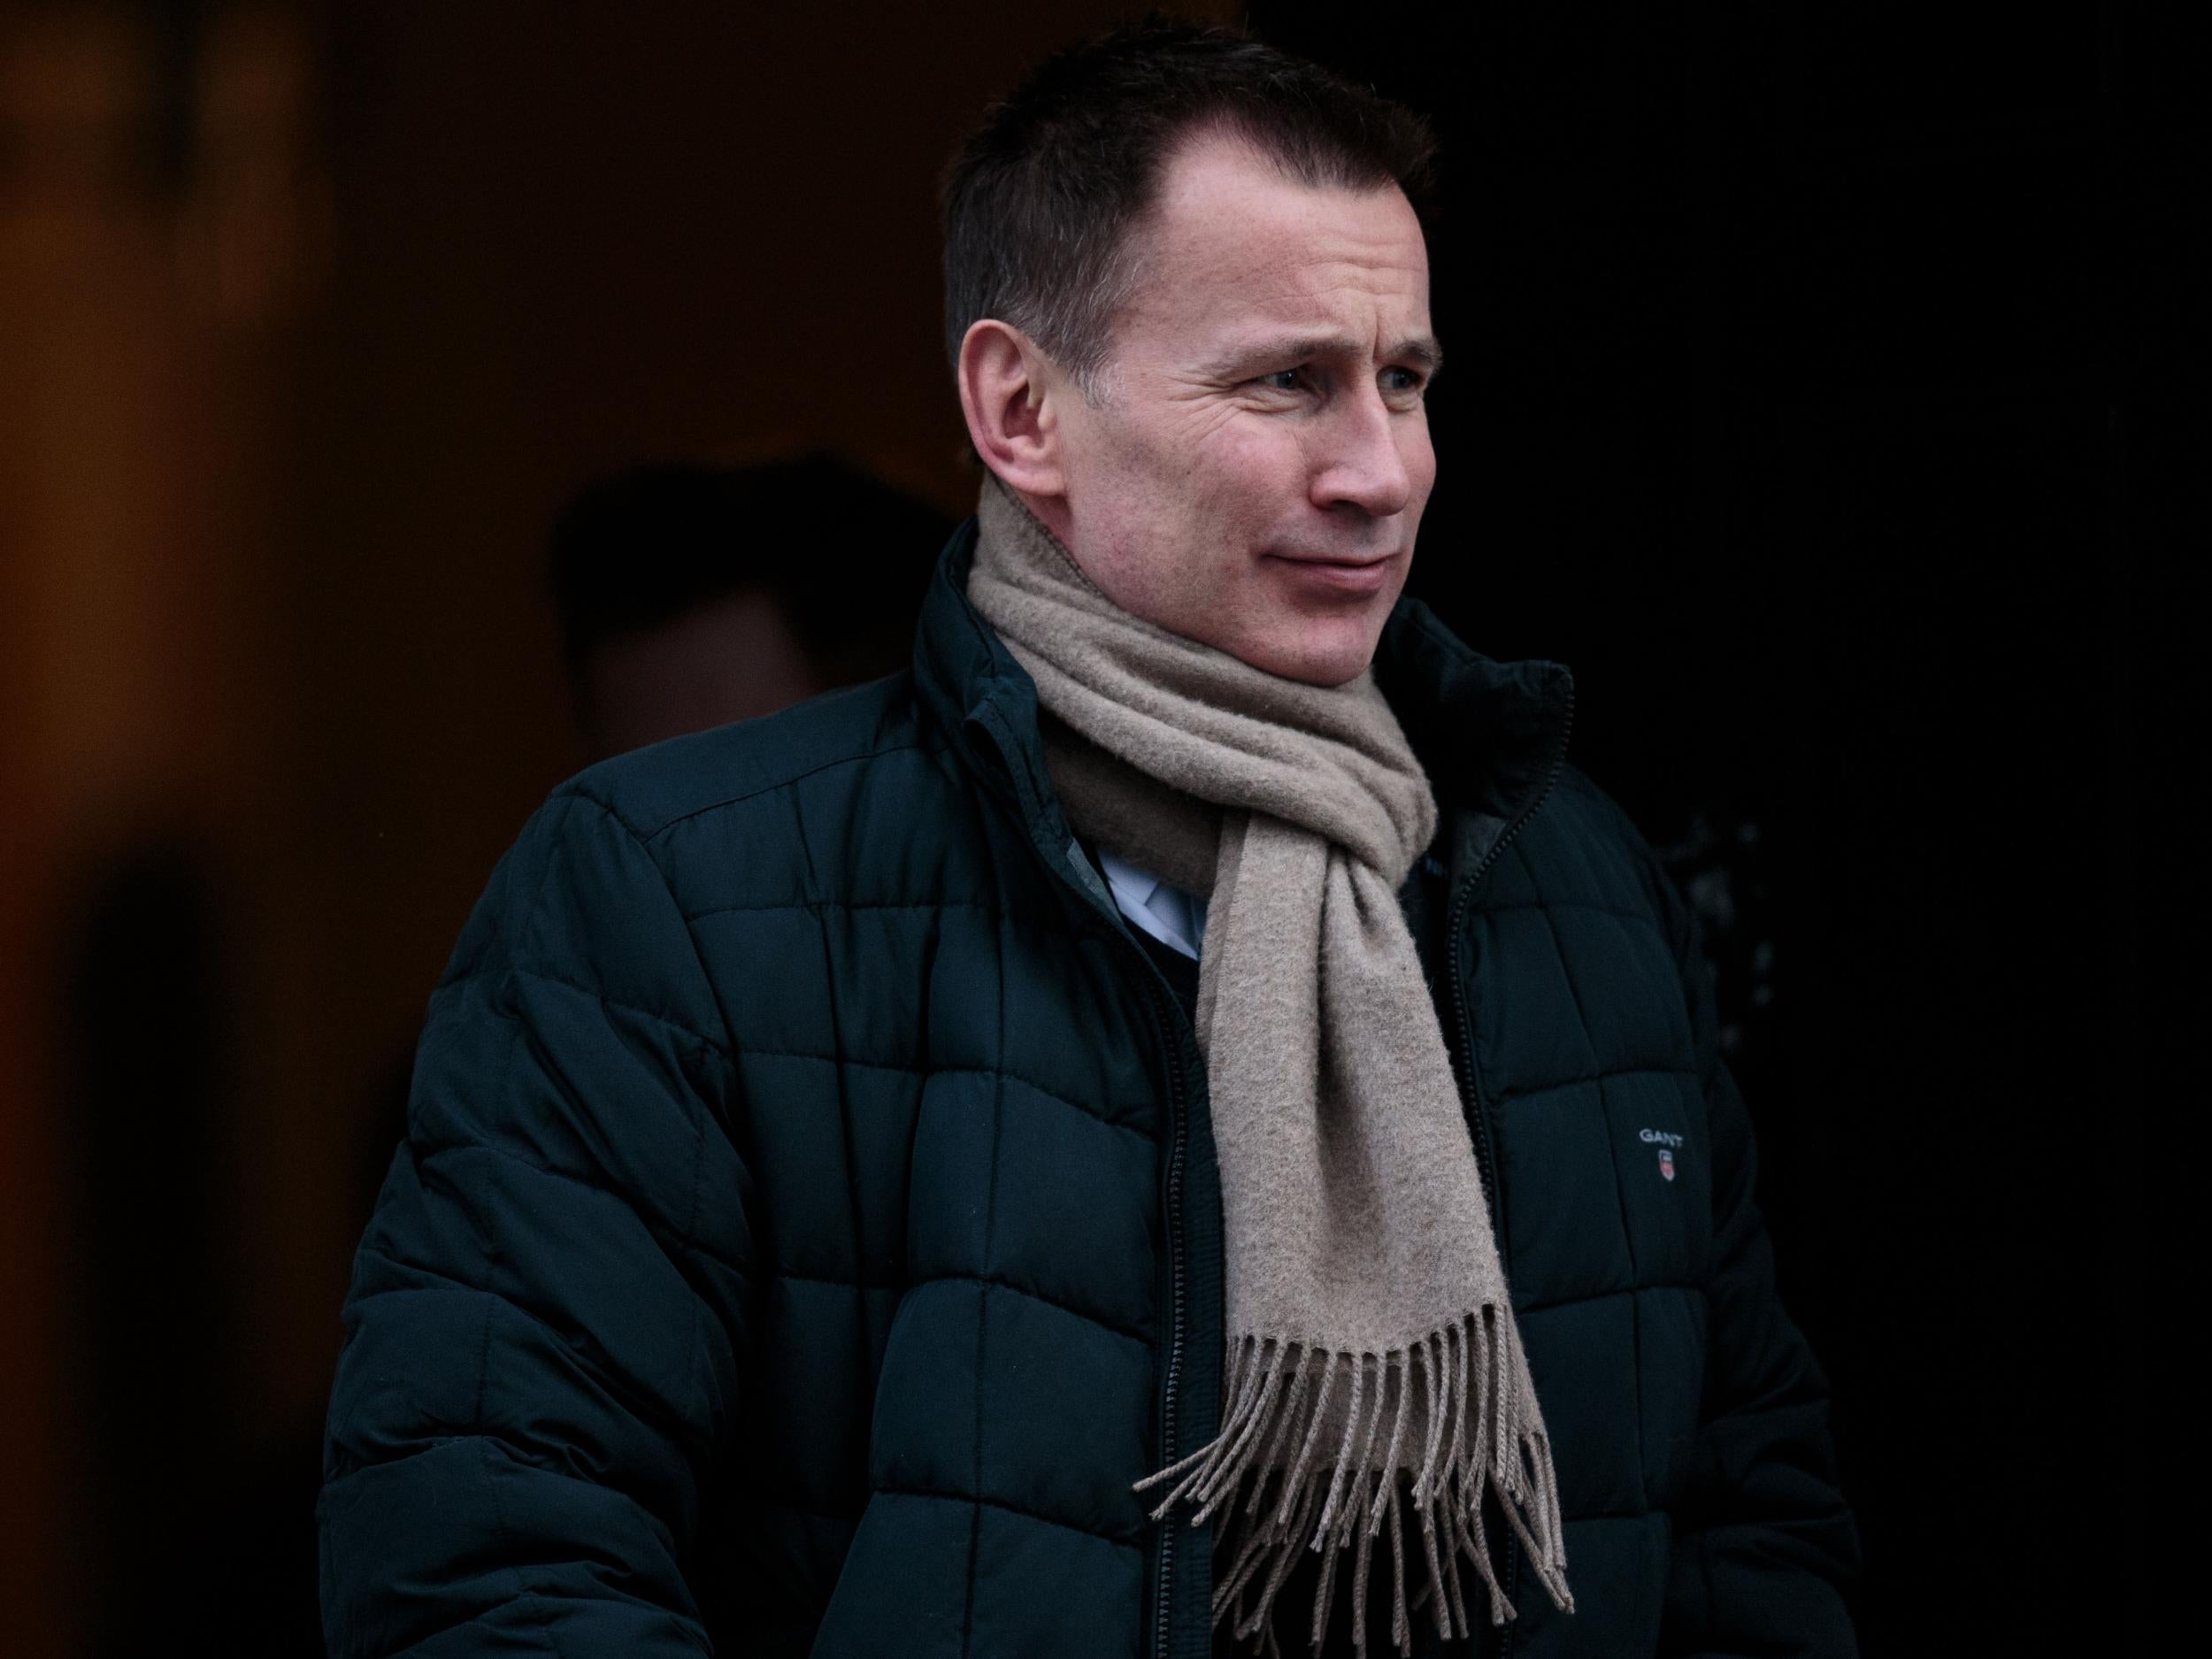 Jeremy Hunt apologised after it was discovered he failed to notify Companies House of his 50 per cent interest in a firm that bought luxury flats